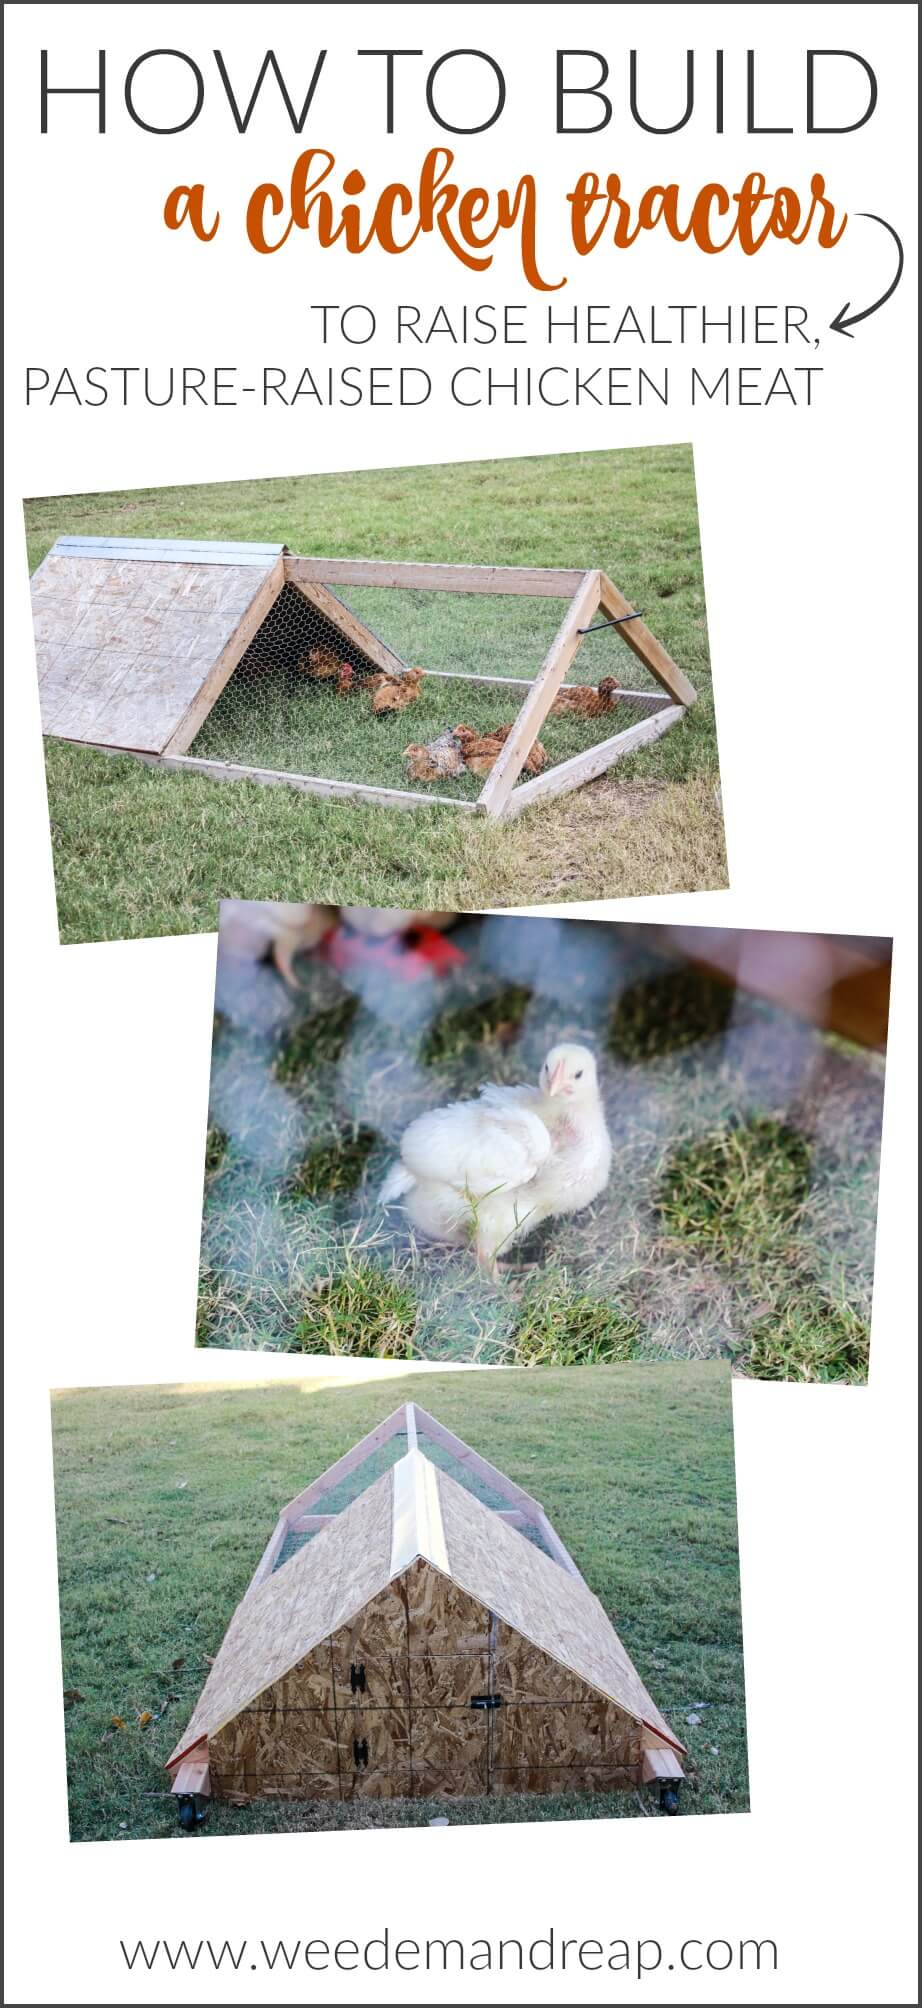 How to Build a Chicken Tractor || Weed 'Em and Reap